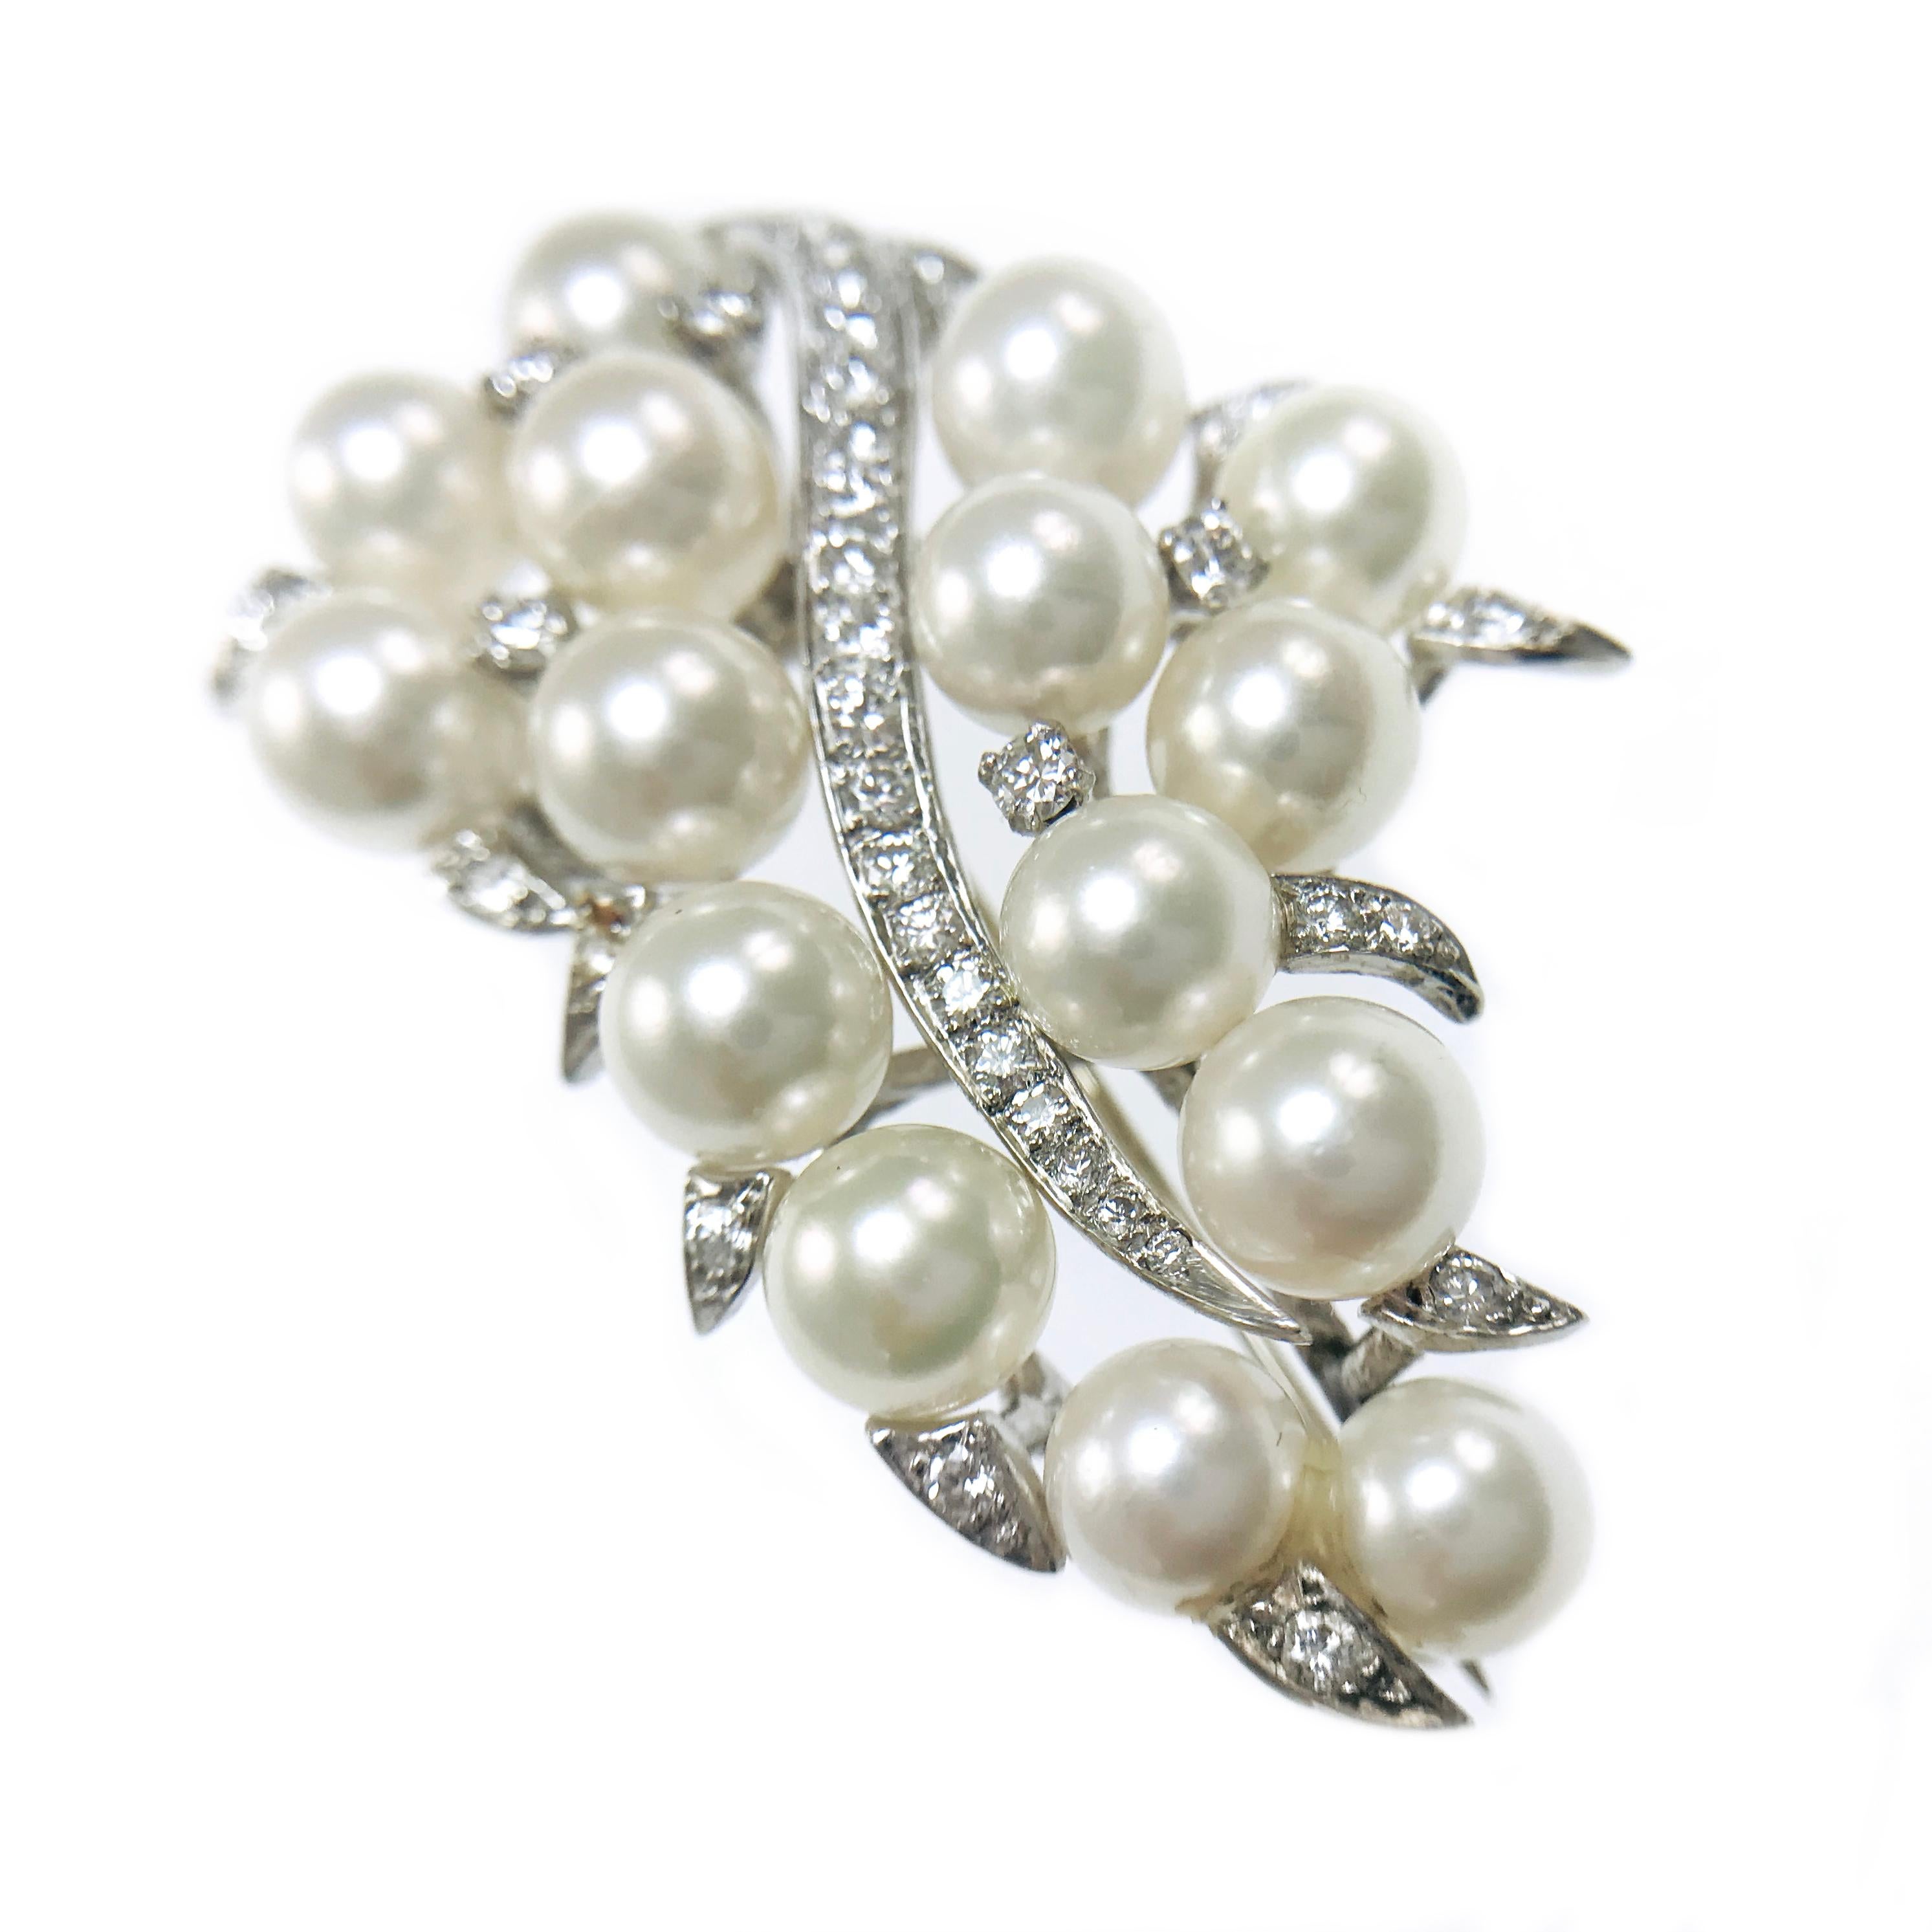 Vintage 14 Karat White Gold Diamond Cultured Akoya Pearl Brooch Pin. Elegant design with fifteen 6.5mm pearls with good luster, a ribbon/scroll of bead-set graduate diamonds and larger prong-set diamonds sprinkled in between the pearls. Stamped on